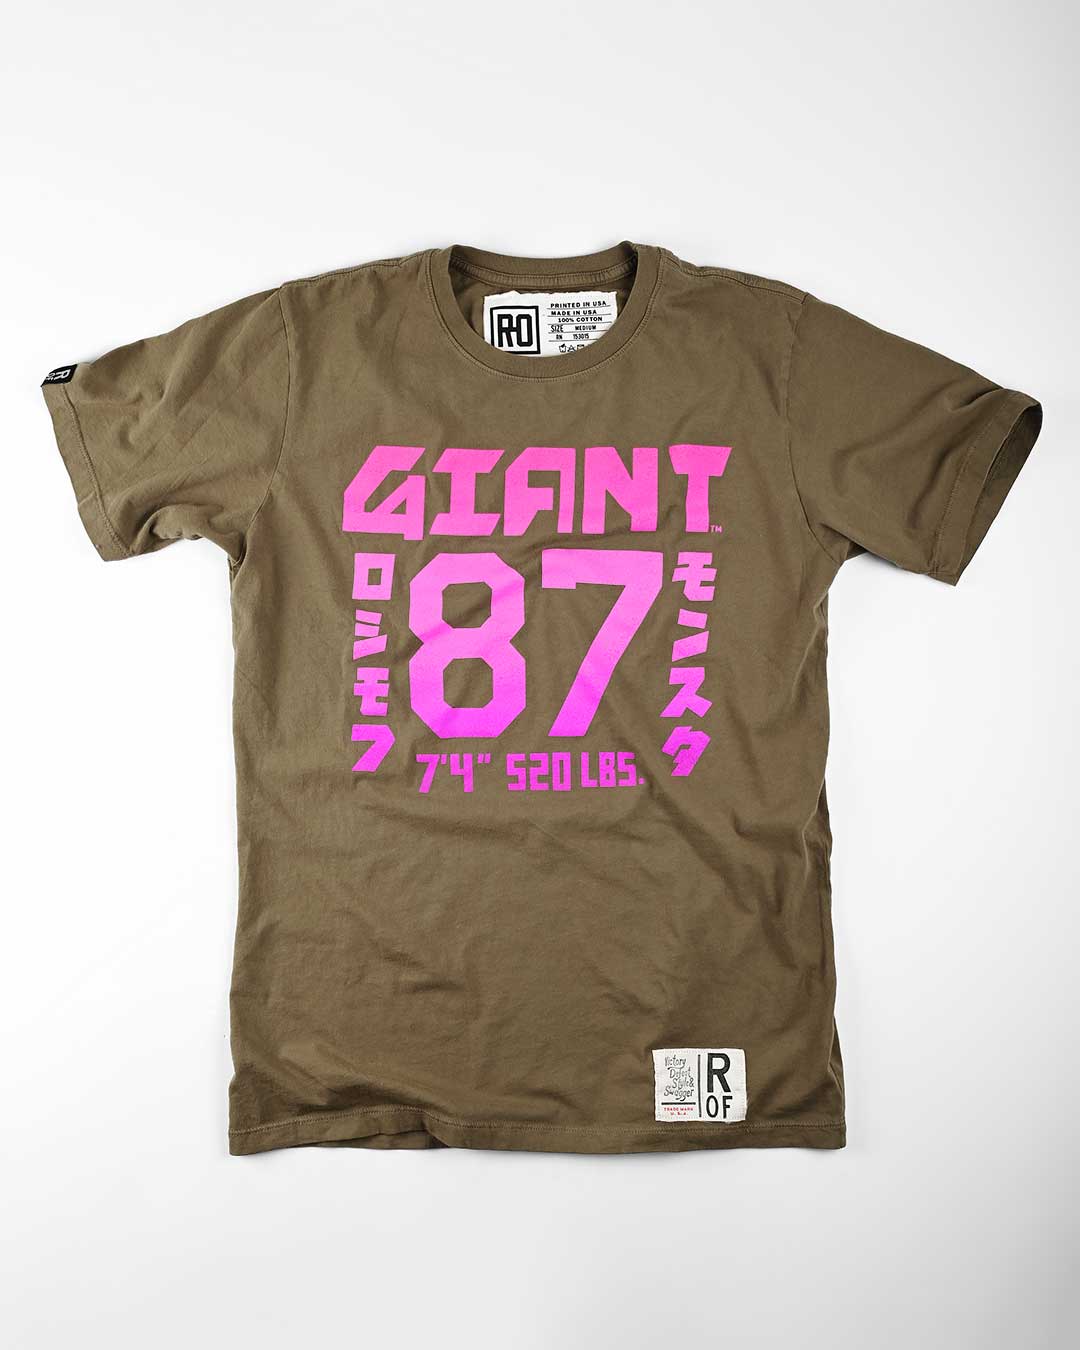 Andre the Giant '87 Olive Tee - Roots of Fight